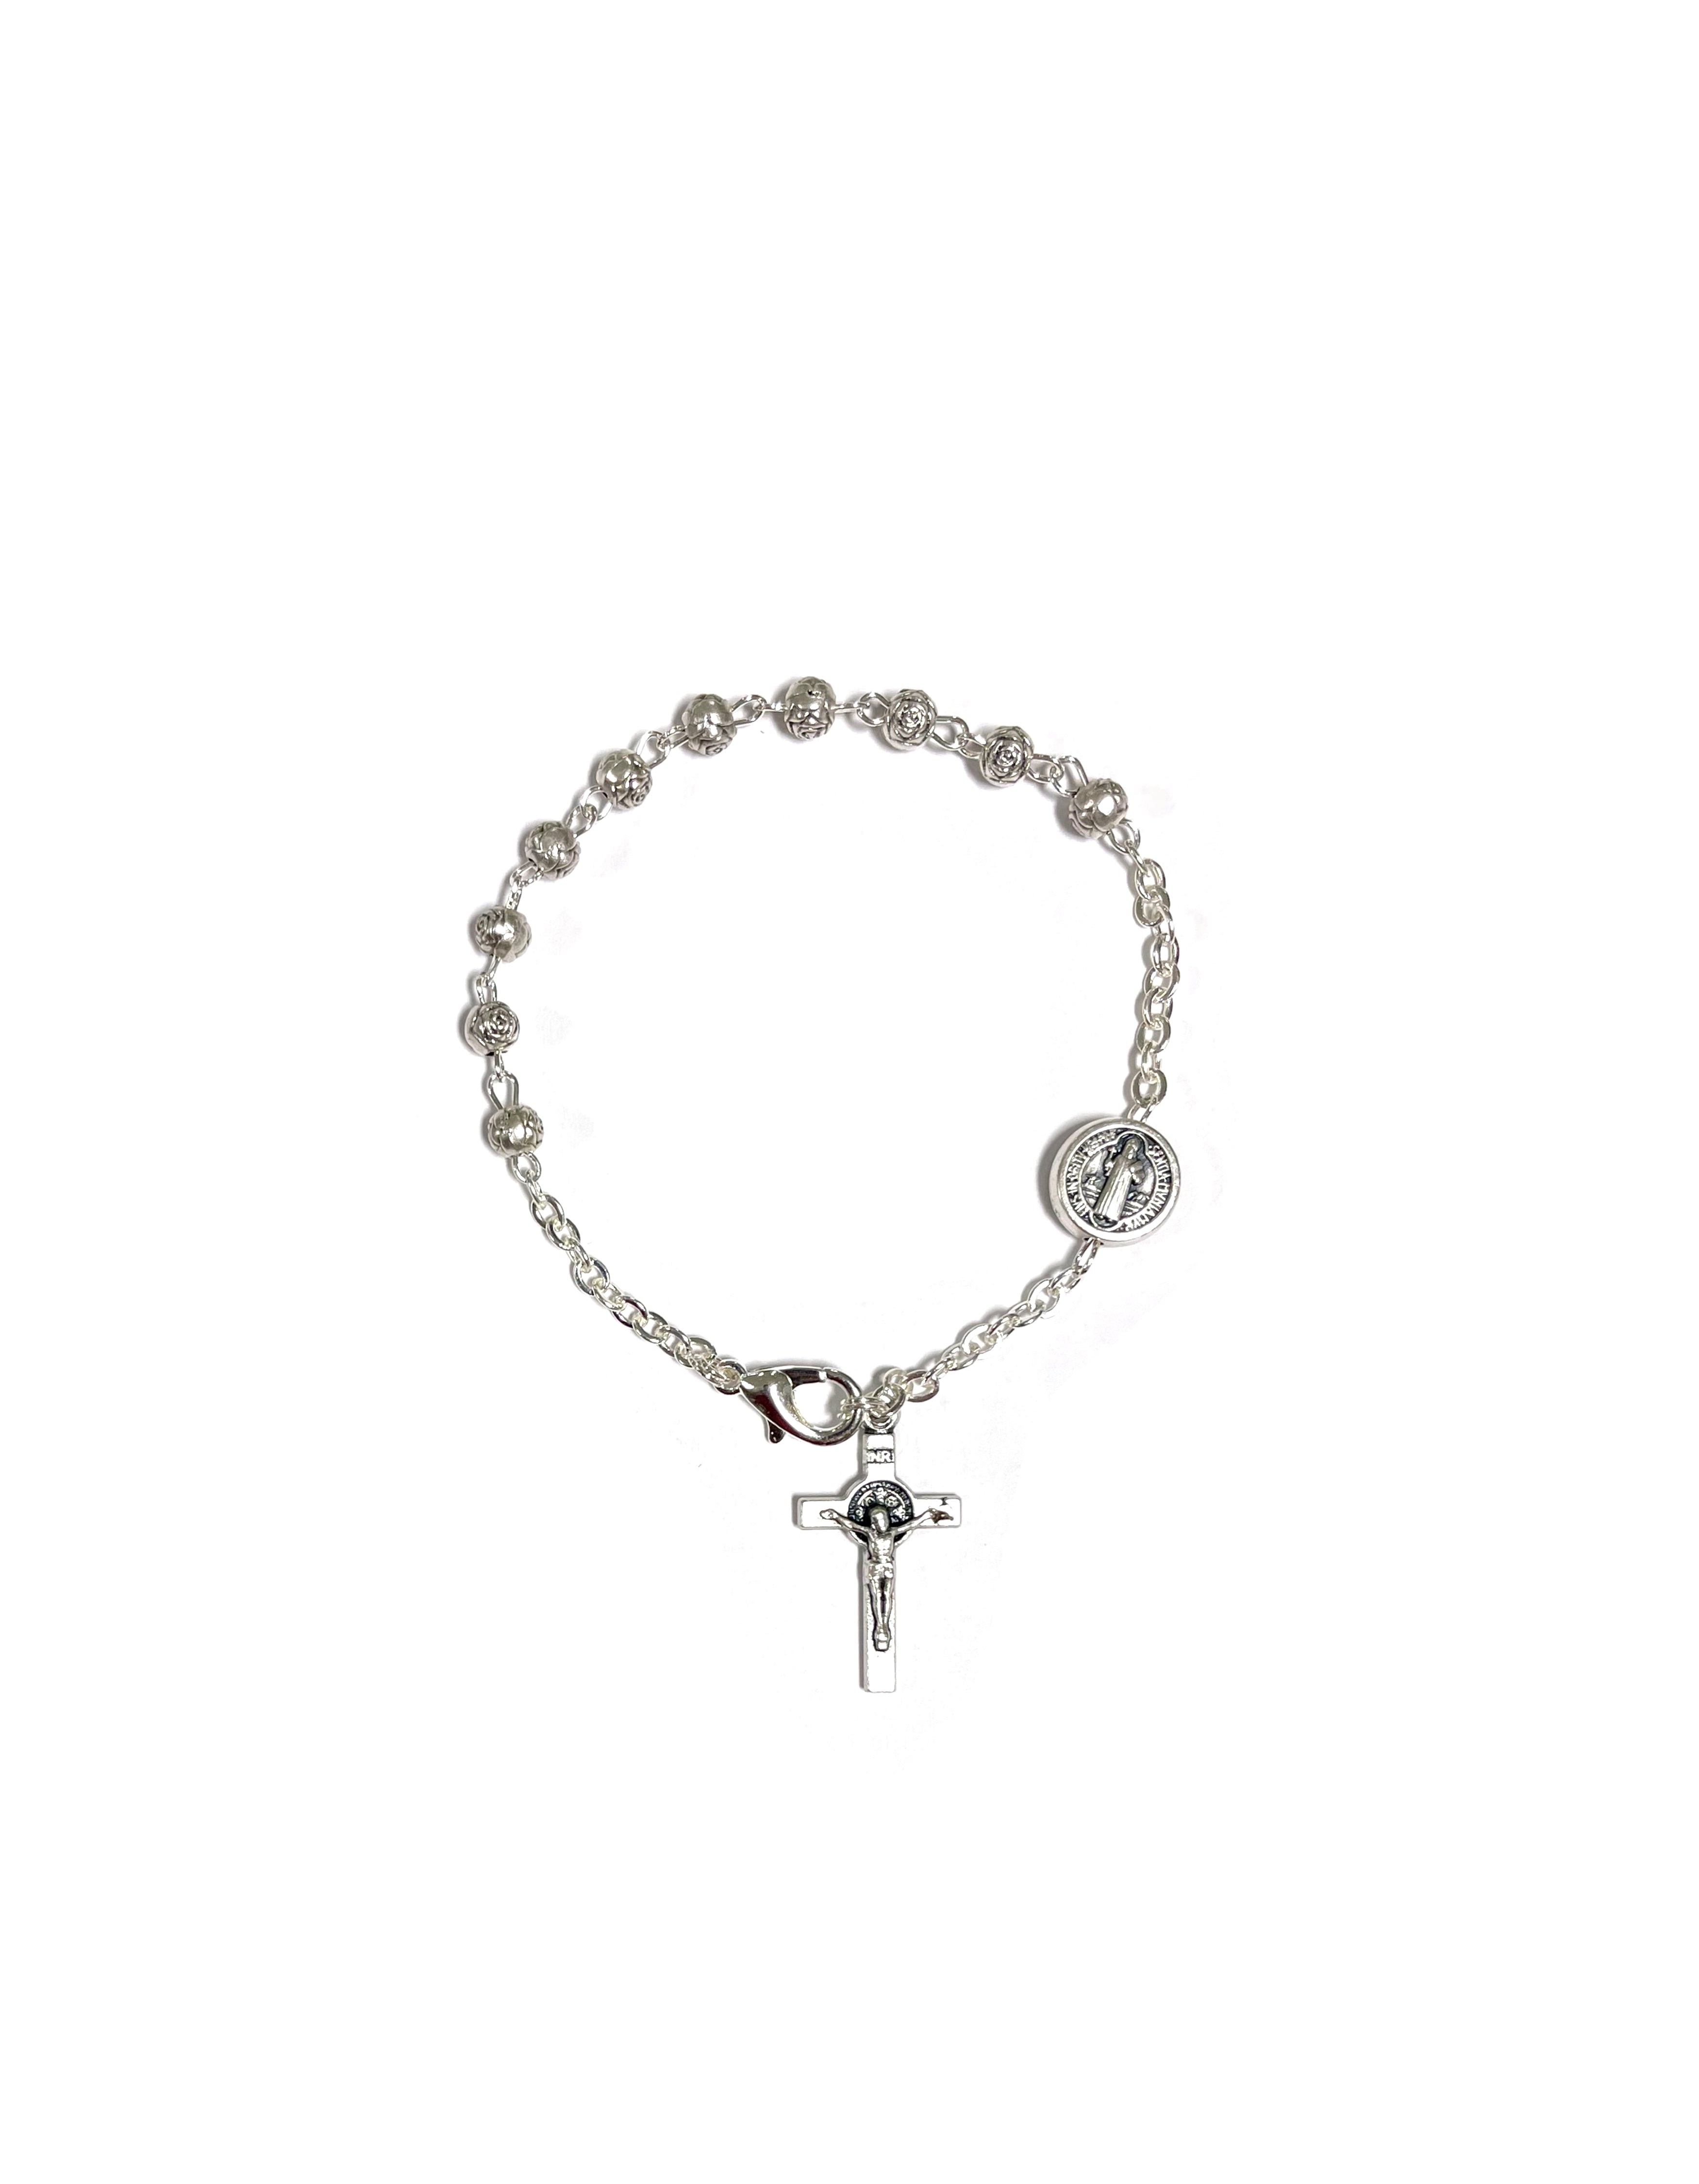 Oxidized silver Saint Benedict bracelet with rose-shaped beads